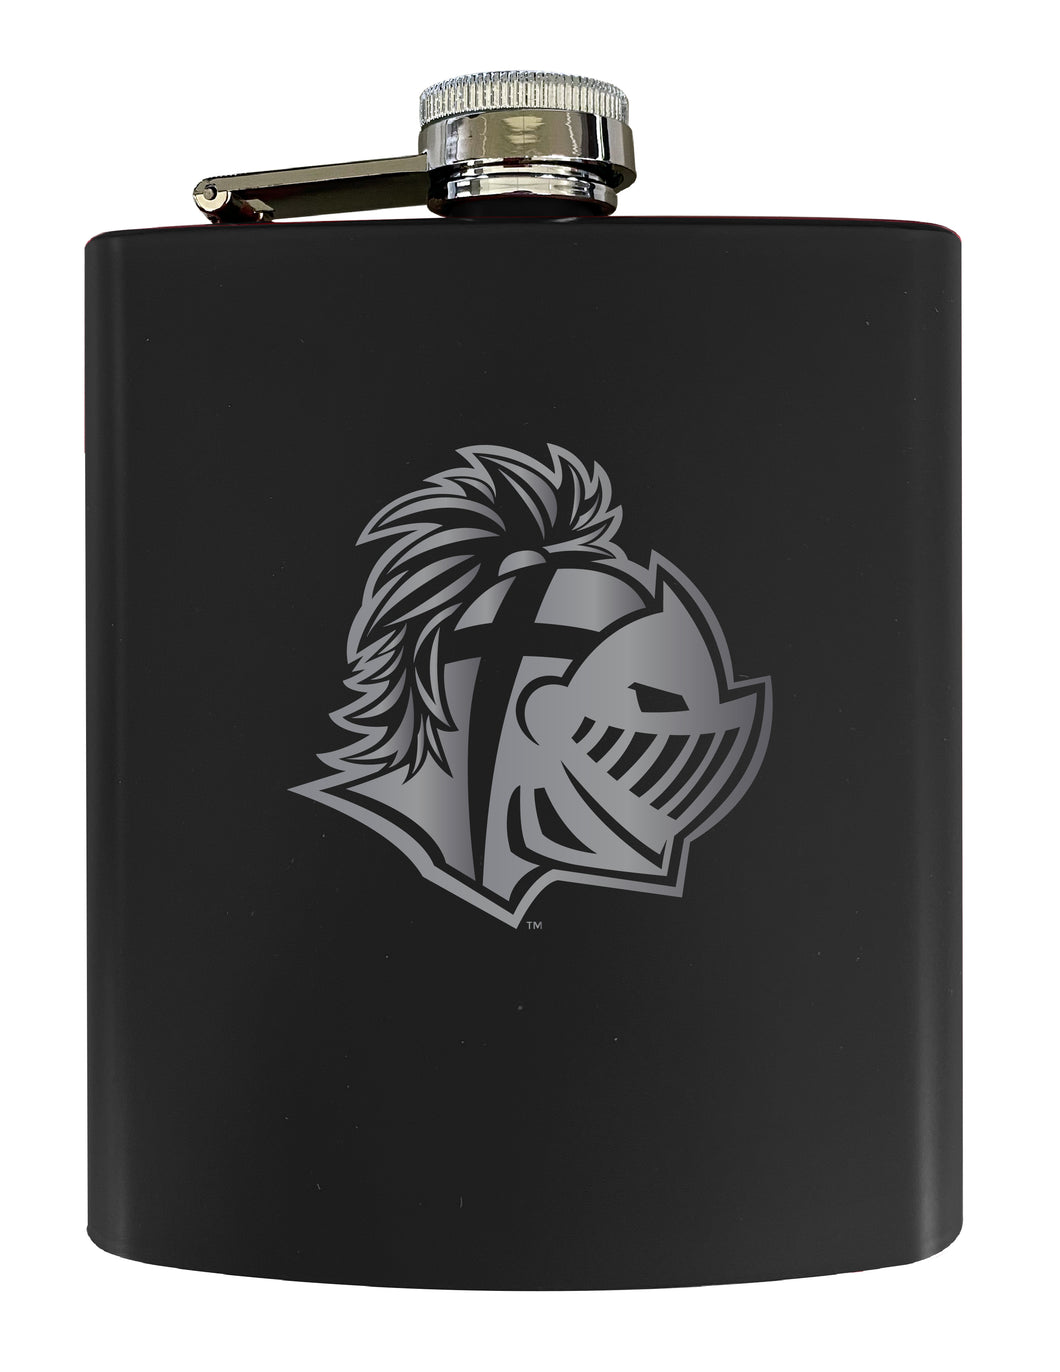 Southern Wesleyan University Stainless Steel Etched Flask 7 oz - Officially Licensed, Choose Your Color, Matte Finish